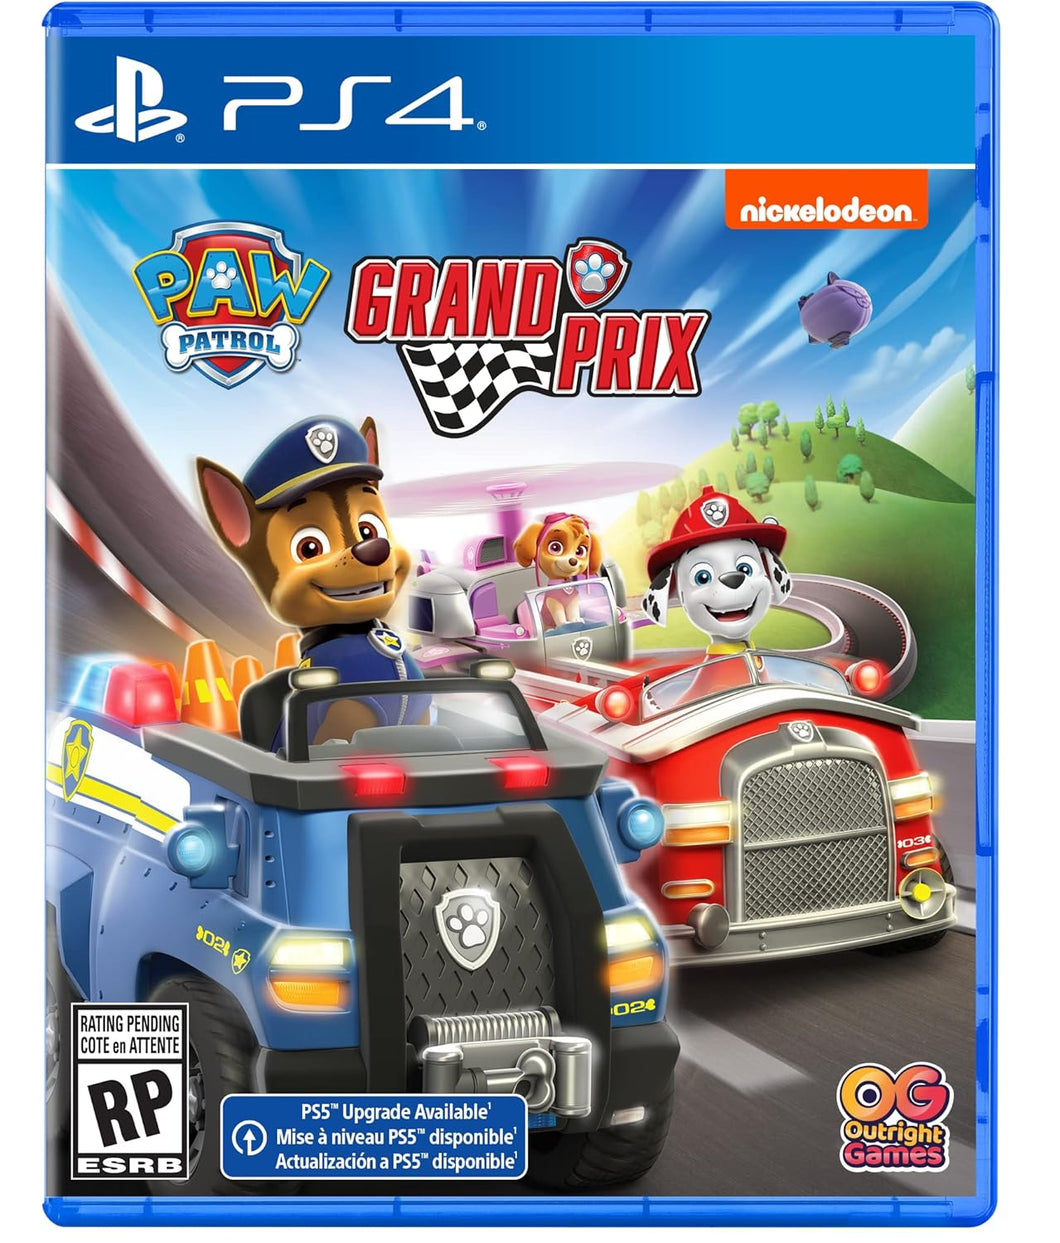 Paw Patrol Grand Prix - PS4 upgradable to PS5